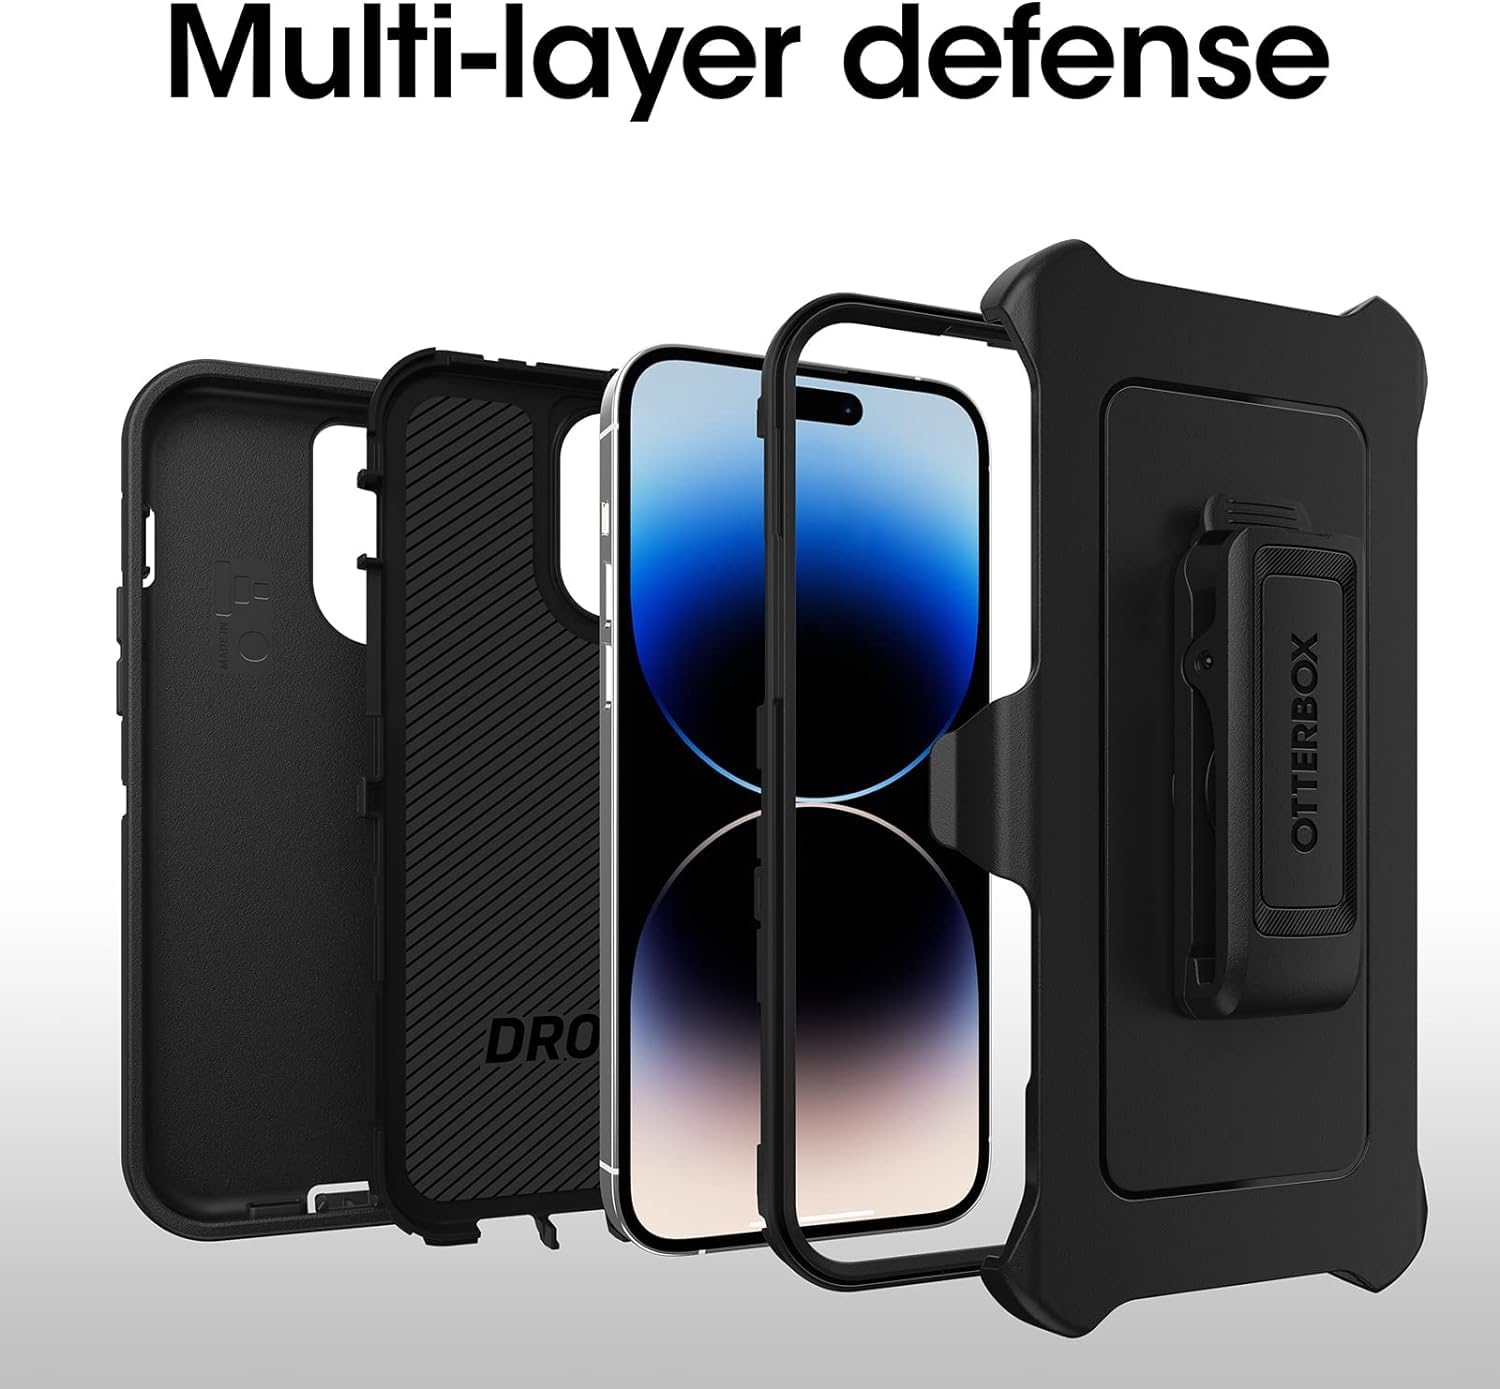 OtterBox iPhone 14 Pro Max (Only) Defender Series Case - Realtree Edge (Black/Realtree Edge Graphic) - Rugged & Durable - with Port Protection - Includes Holster Clip Kickstand - Non-Retail Packaging